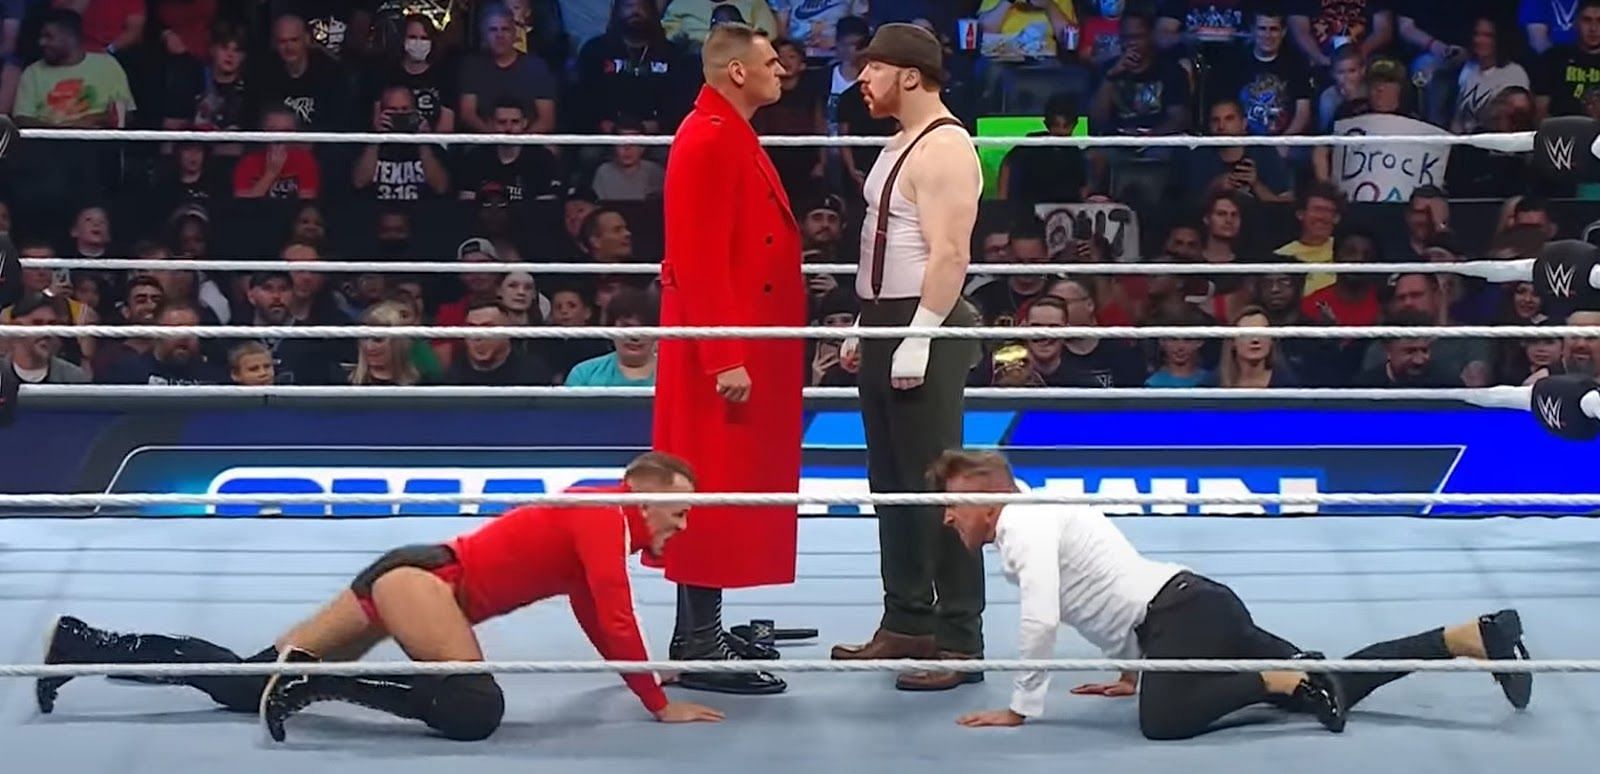 The staredown at SmackDown